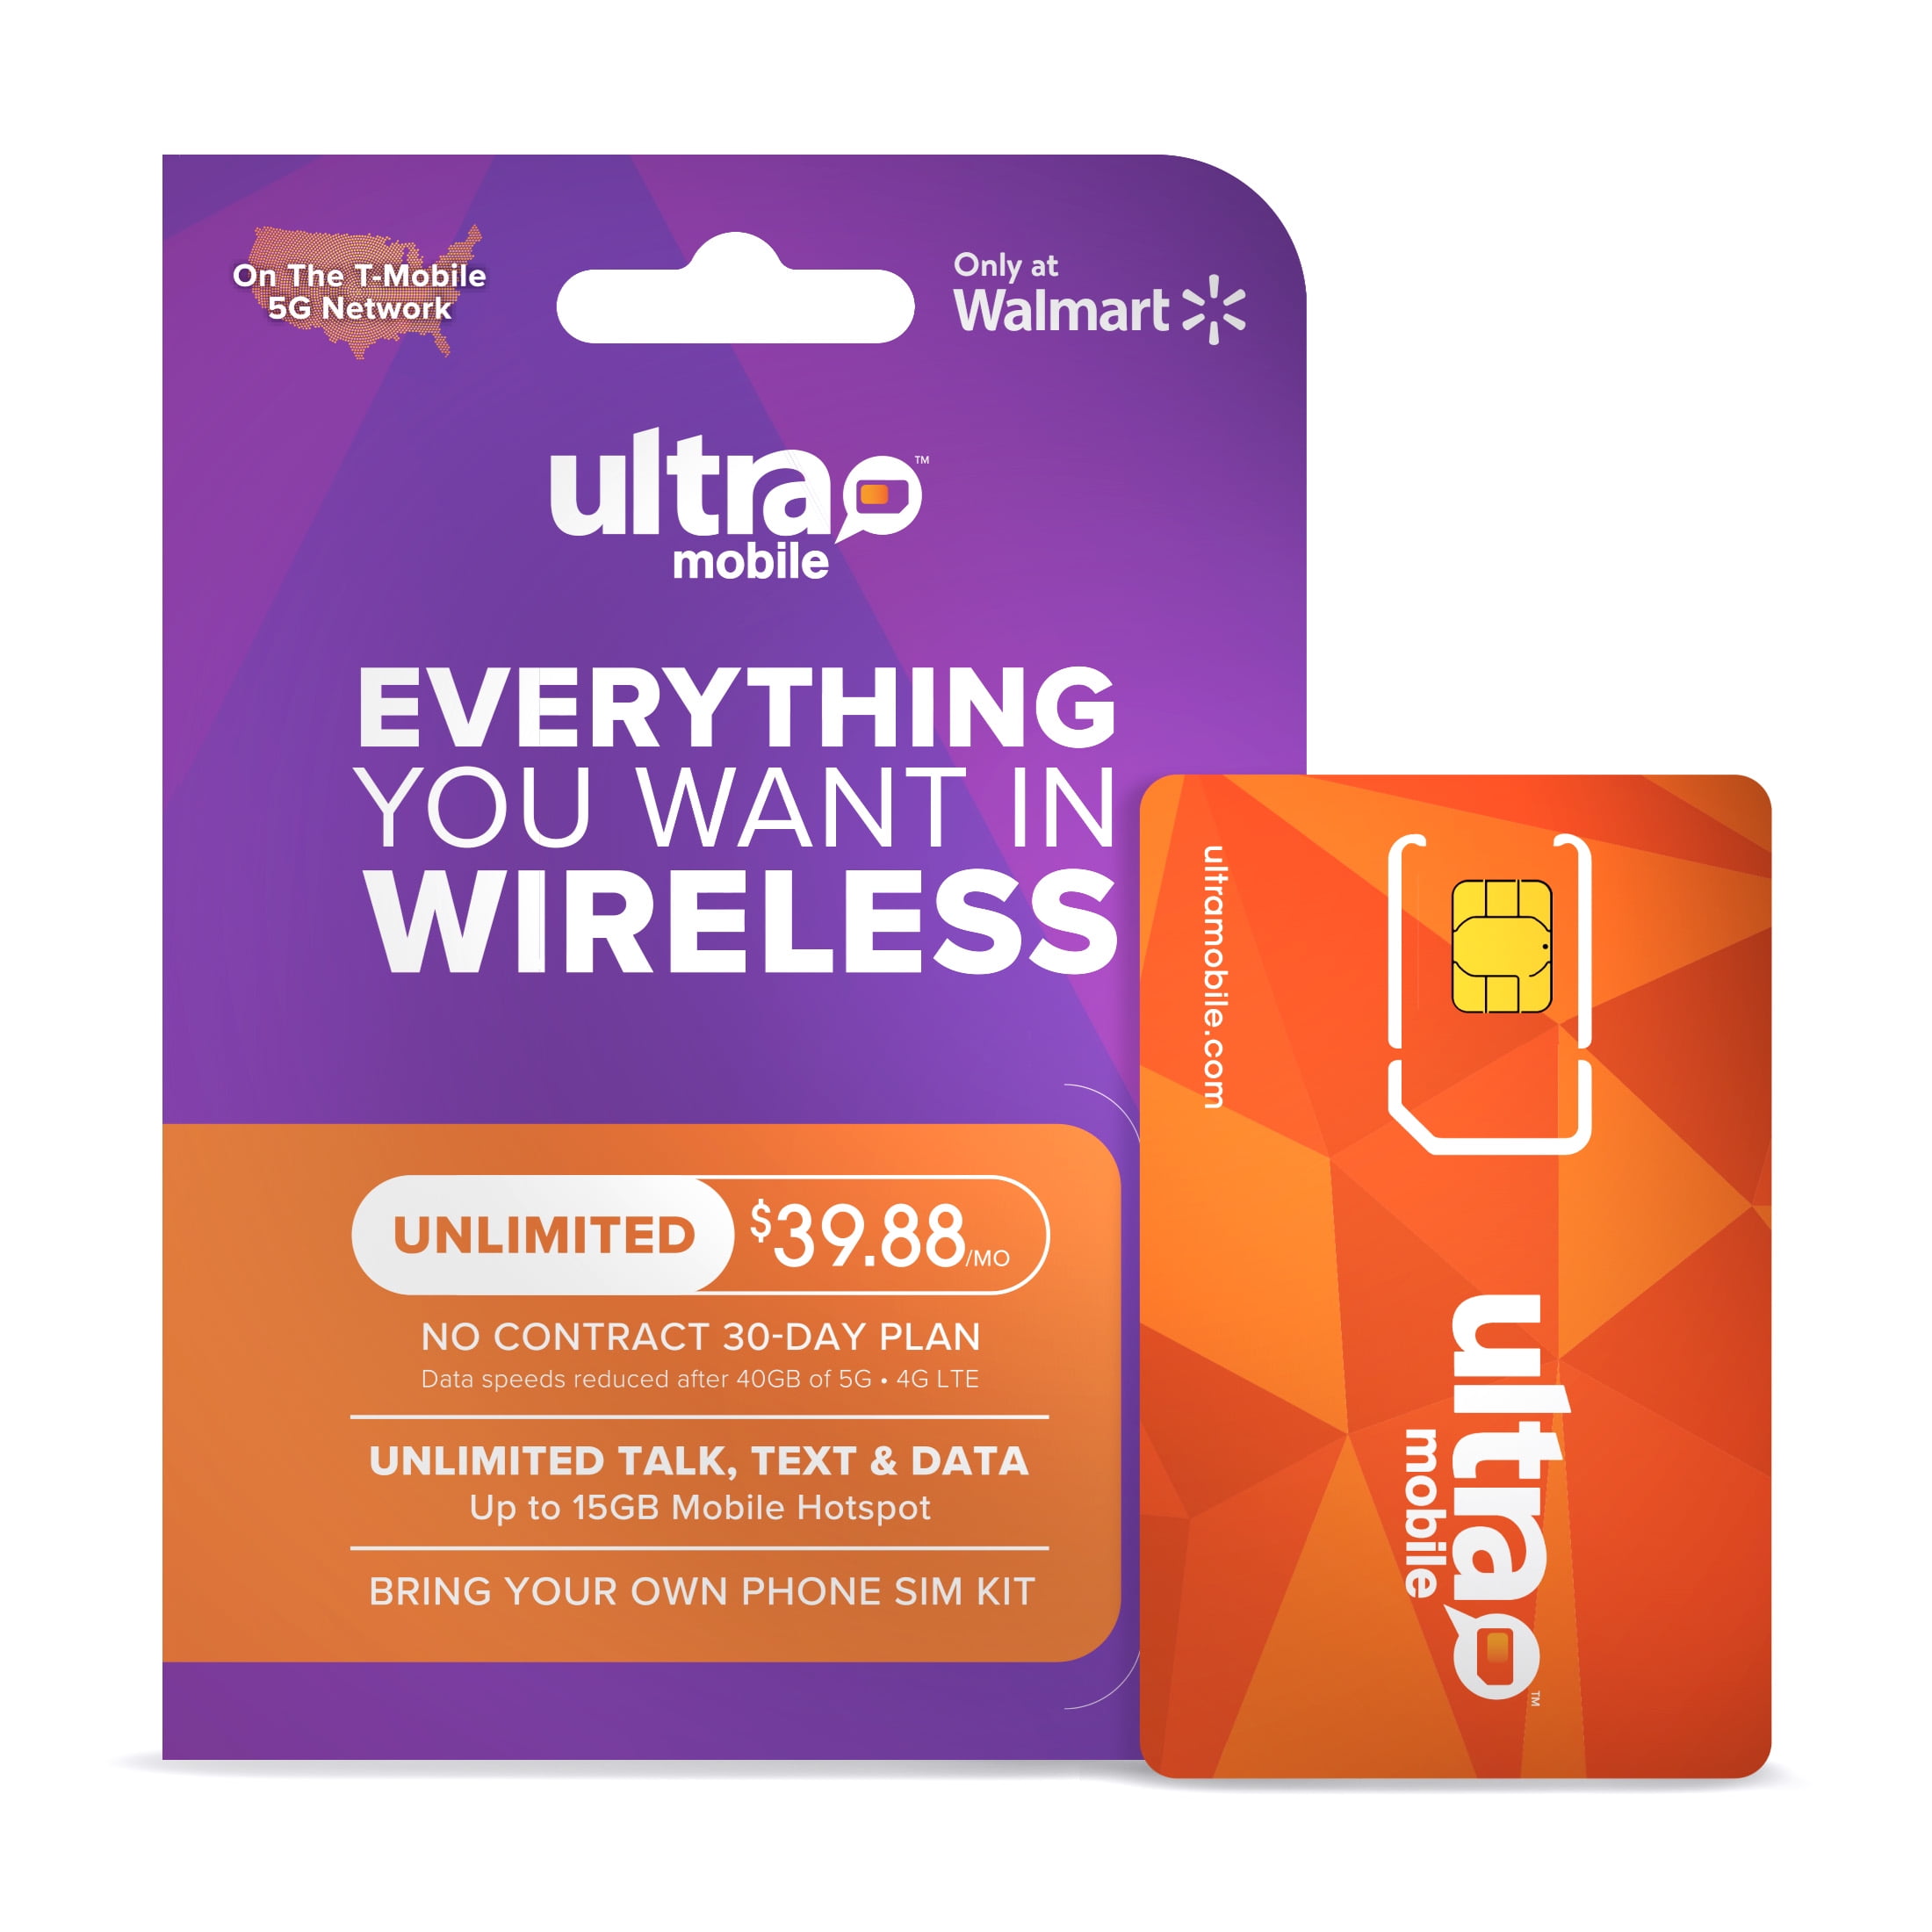 Ultra Mobile $39.88 Unlimited (40GB) and 15GB Hotspot 30 Day Prepaid Wireless Plan SIM Kit